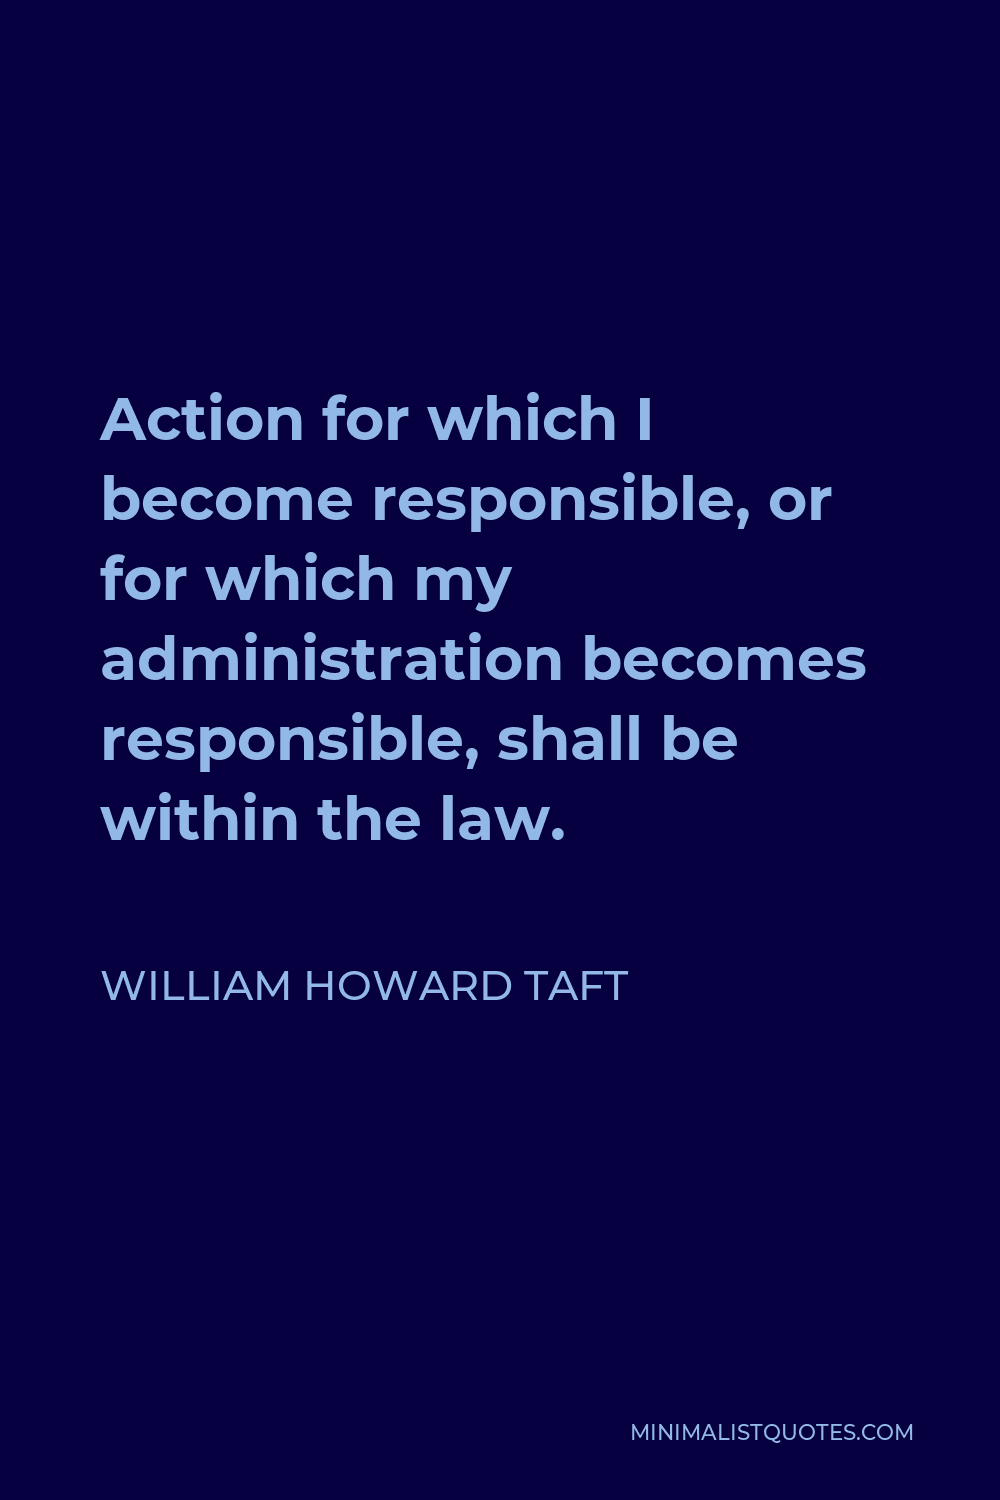 William Howard Taft Quote - Action for which I become responsible, or for which my administration becomes responsible, shall be within the law.